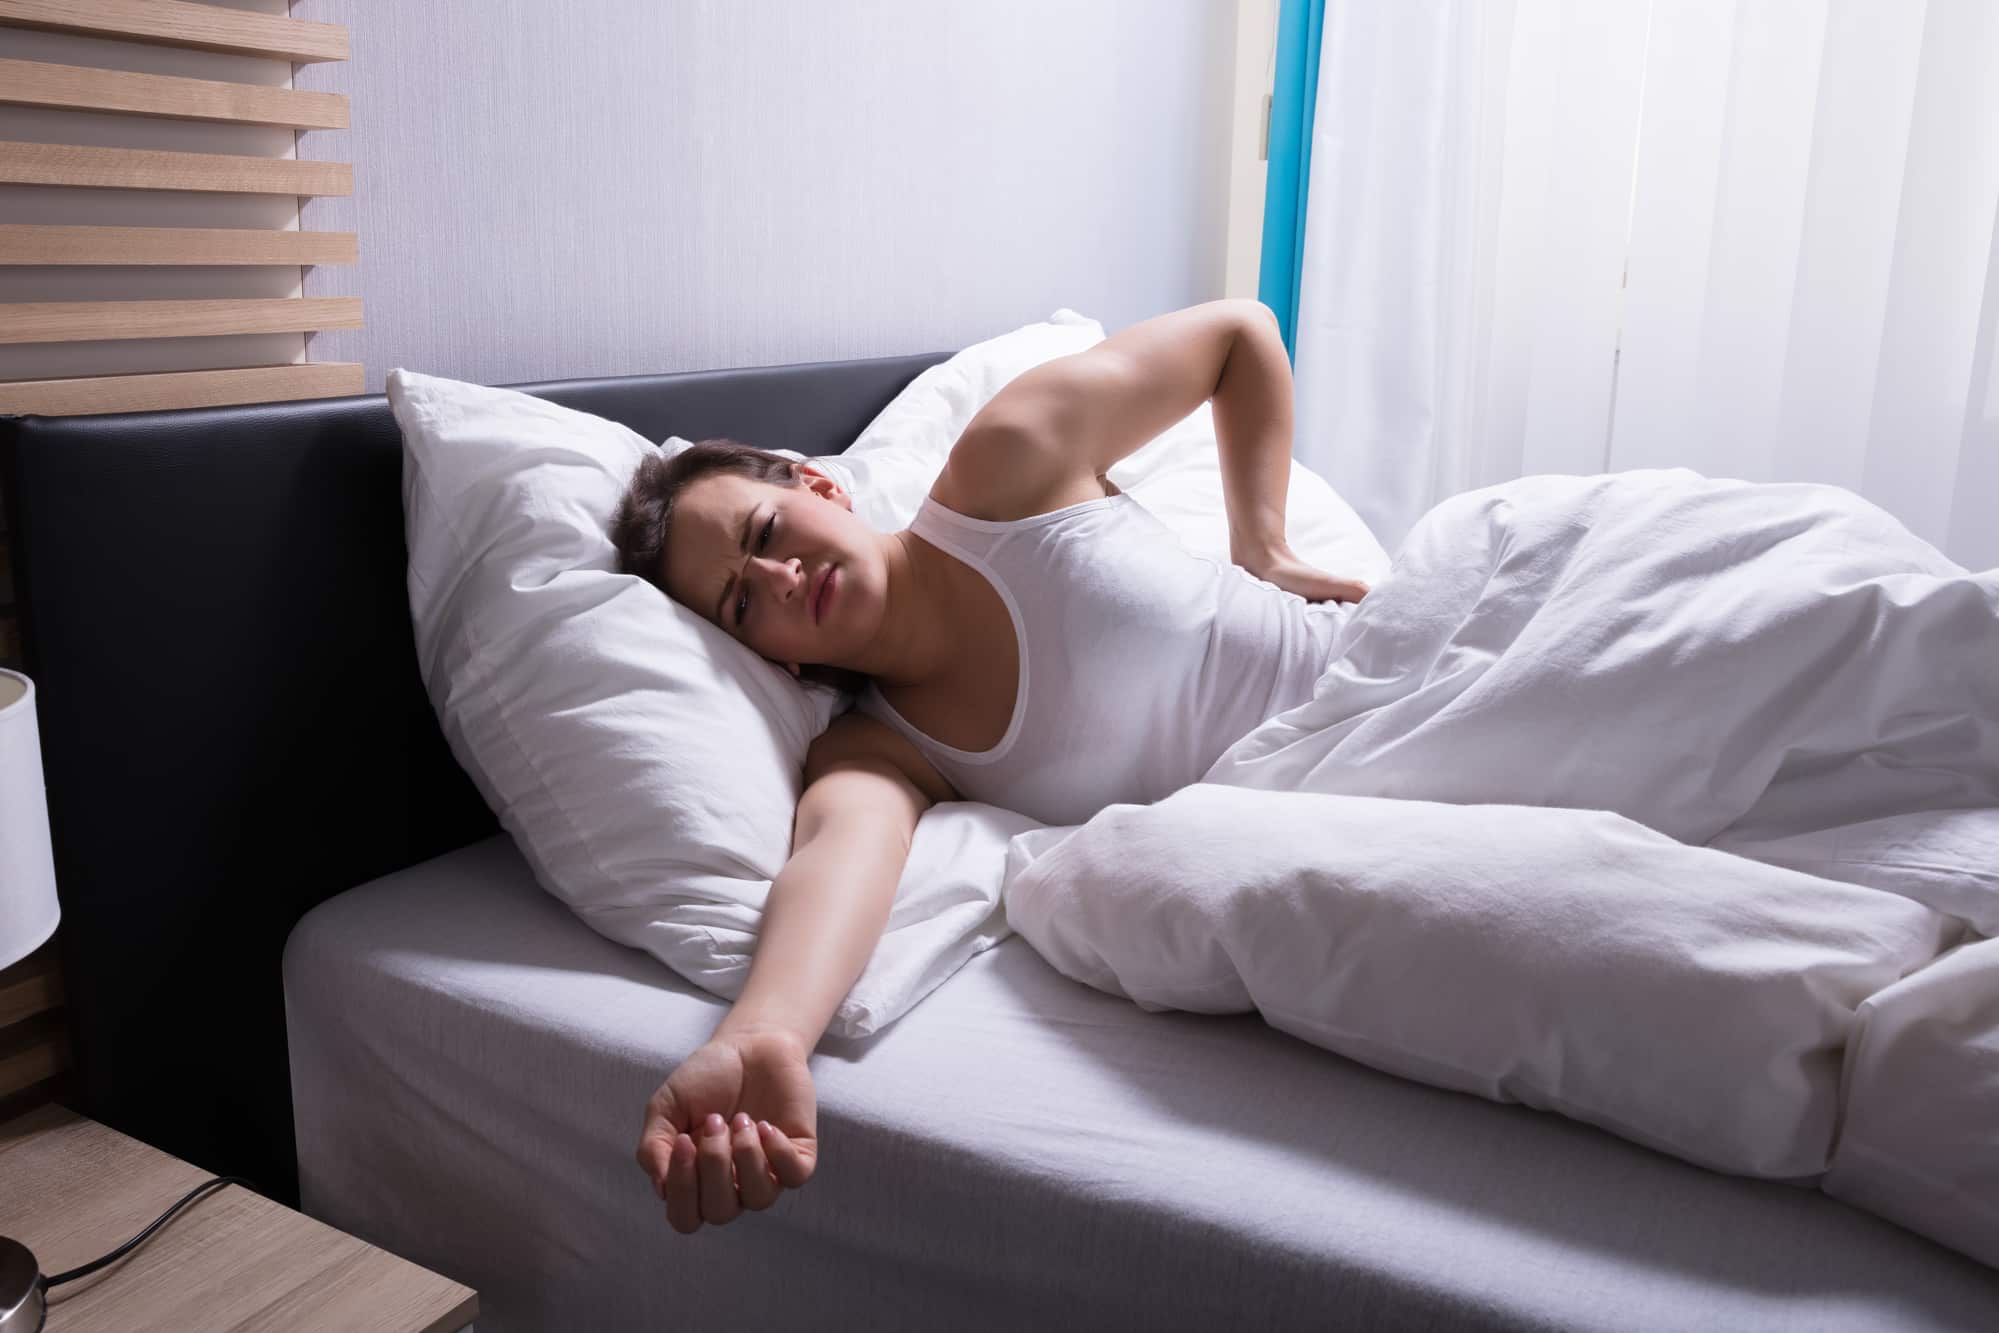 A woman uses a mattress for sciatic nerve pain